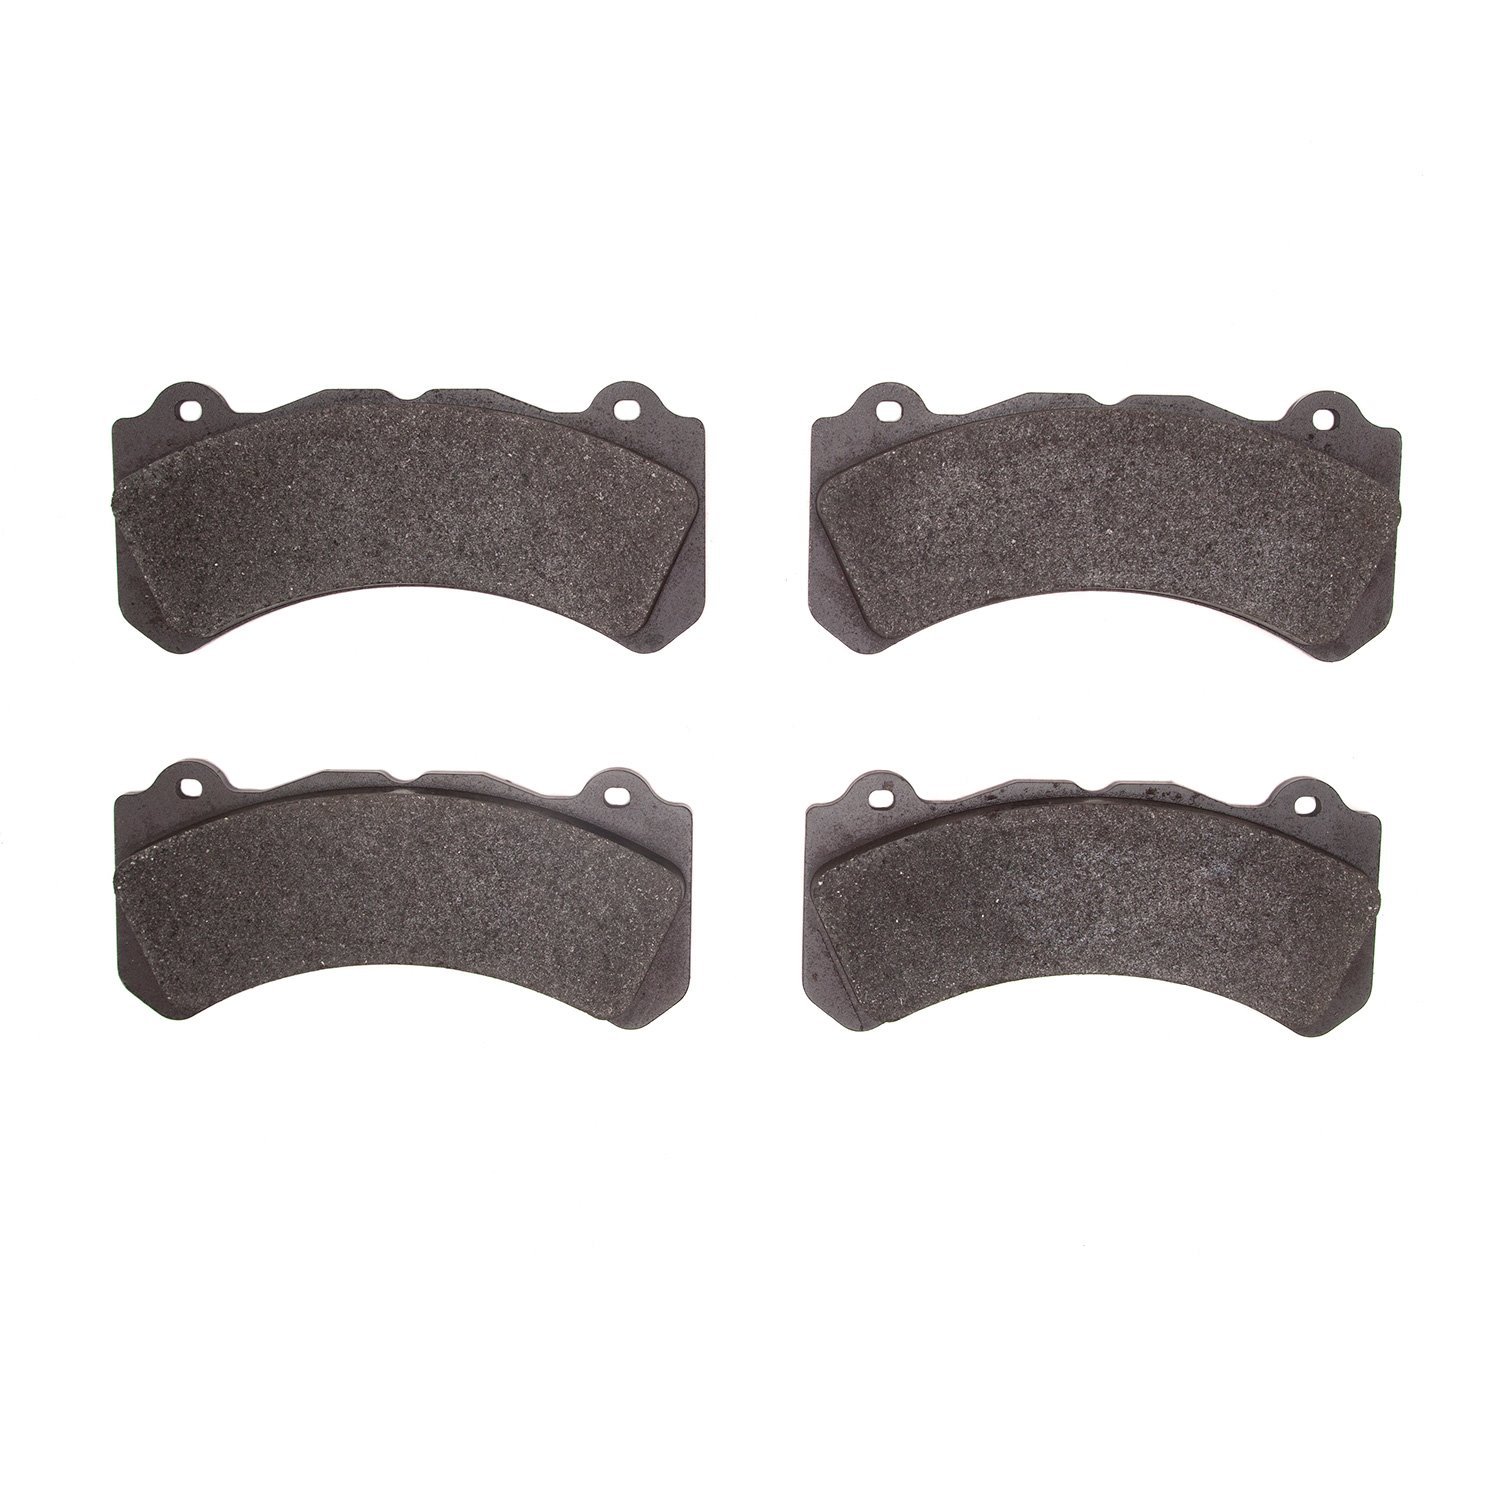 Optimum OE Brake Pads, Fits Select Volvo, Position: Front